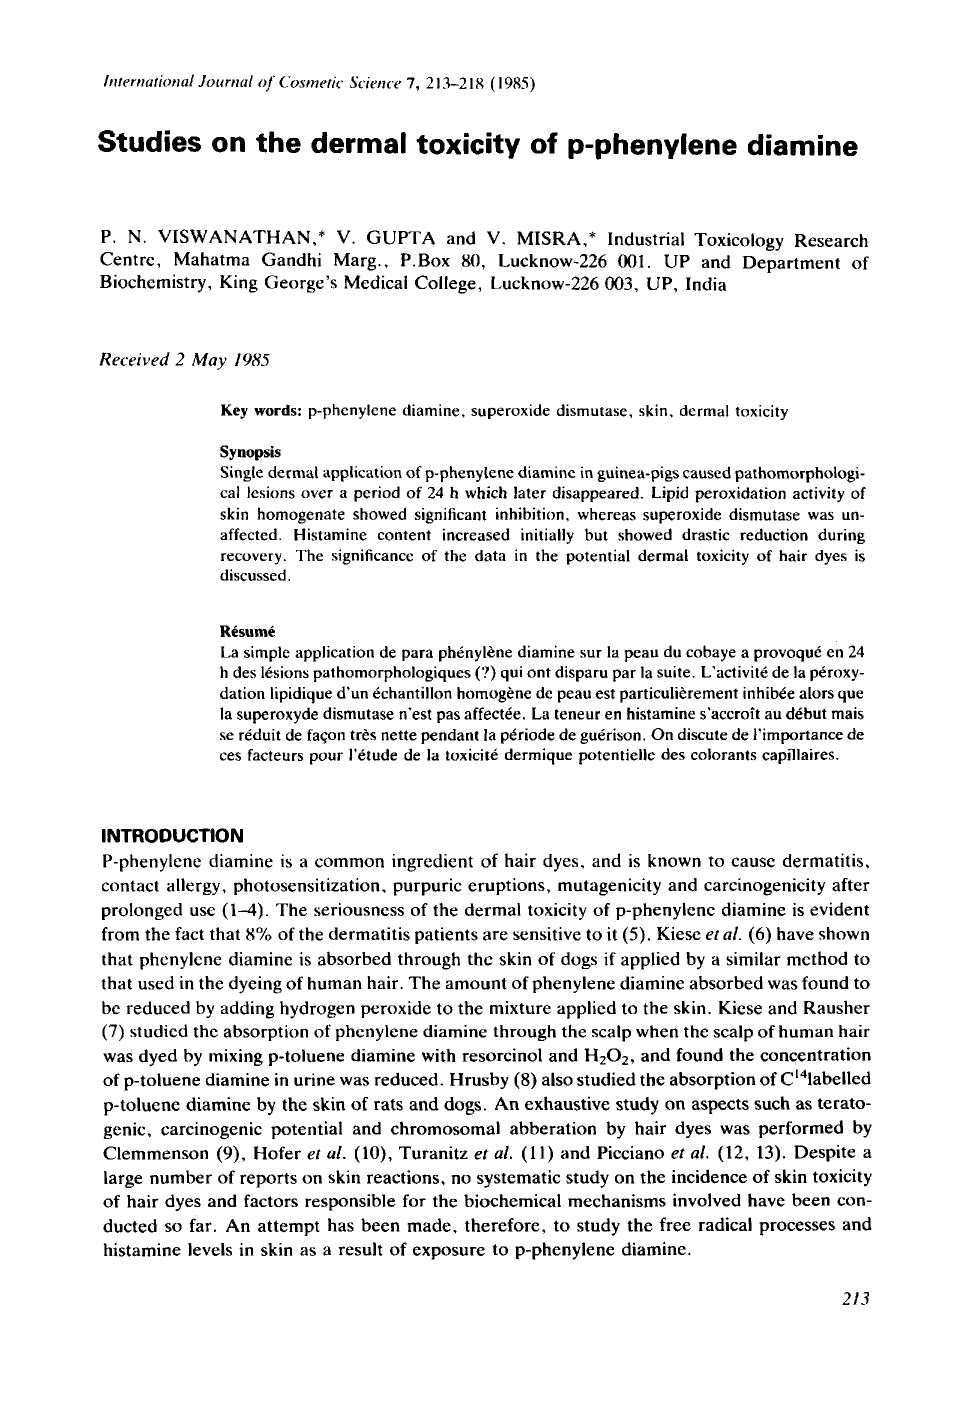 Studies on the dermal toxicity of p-phenylene diamine by Unknown